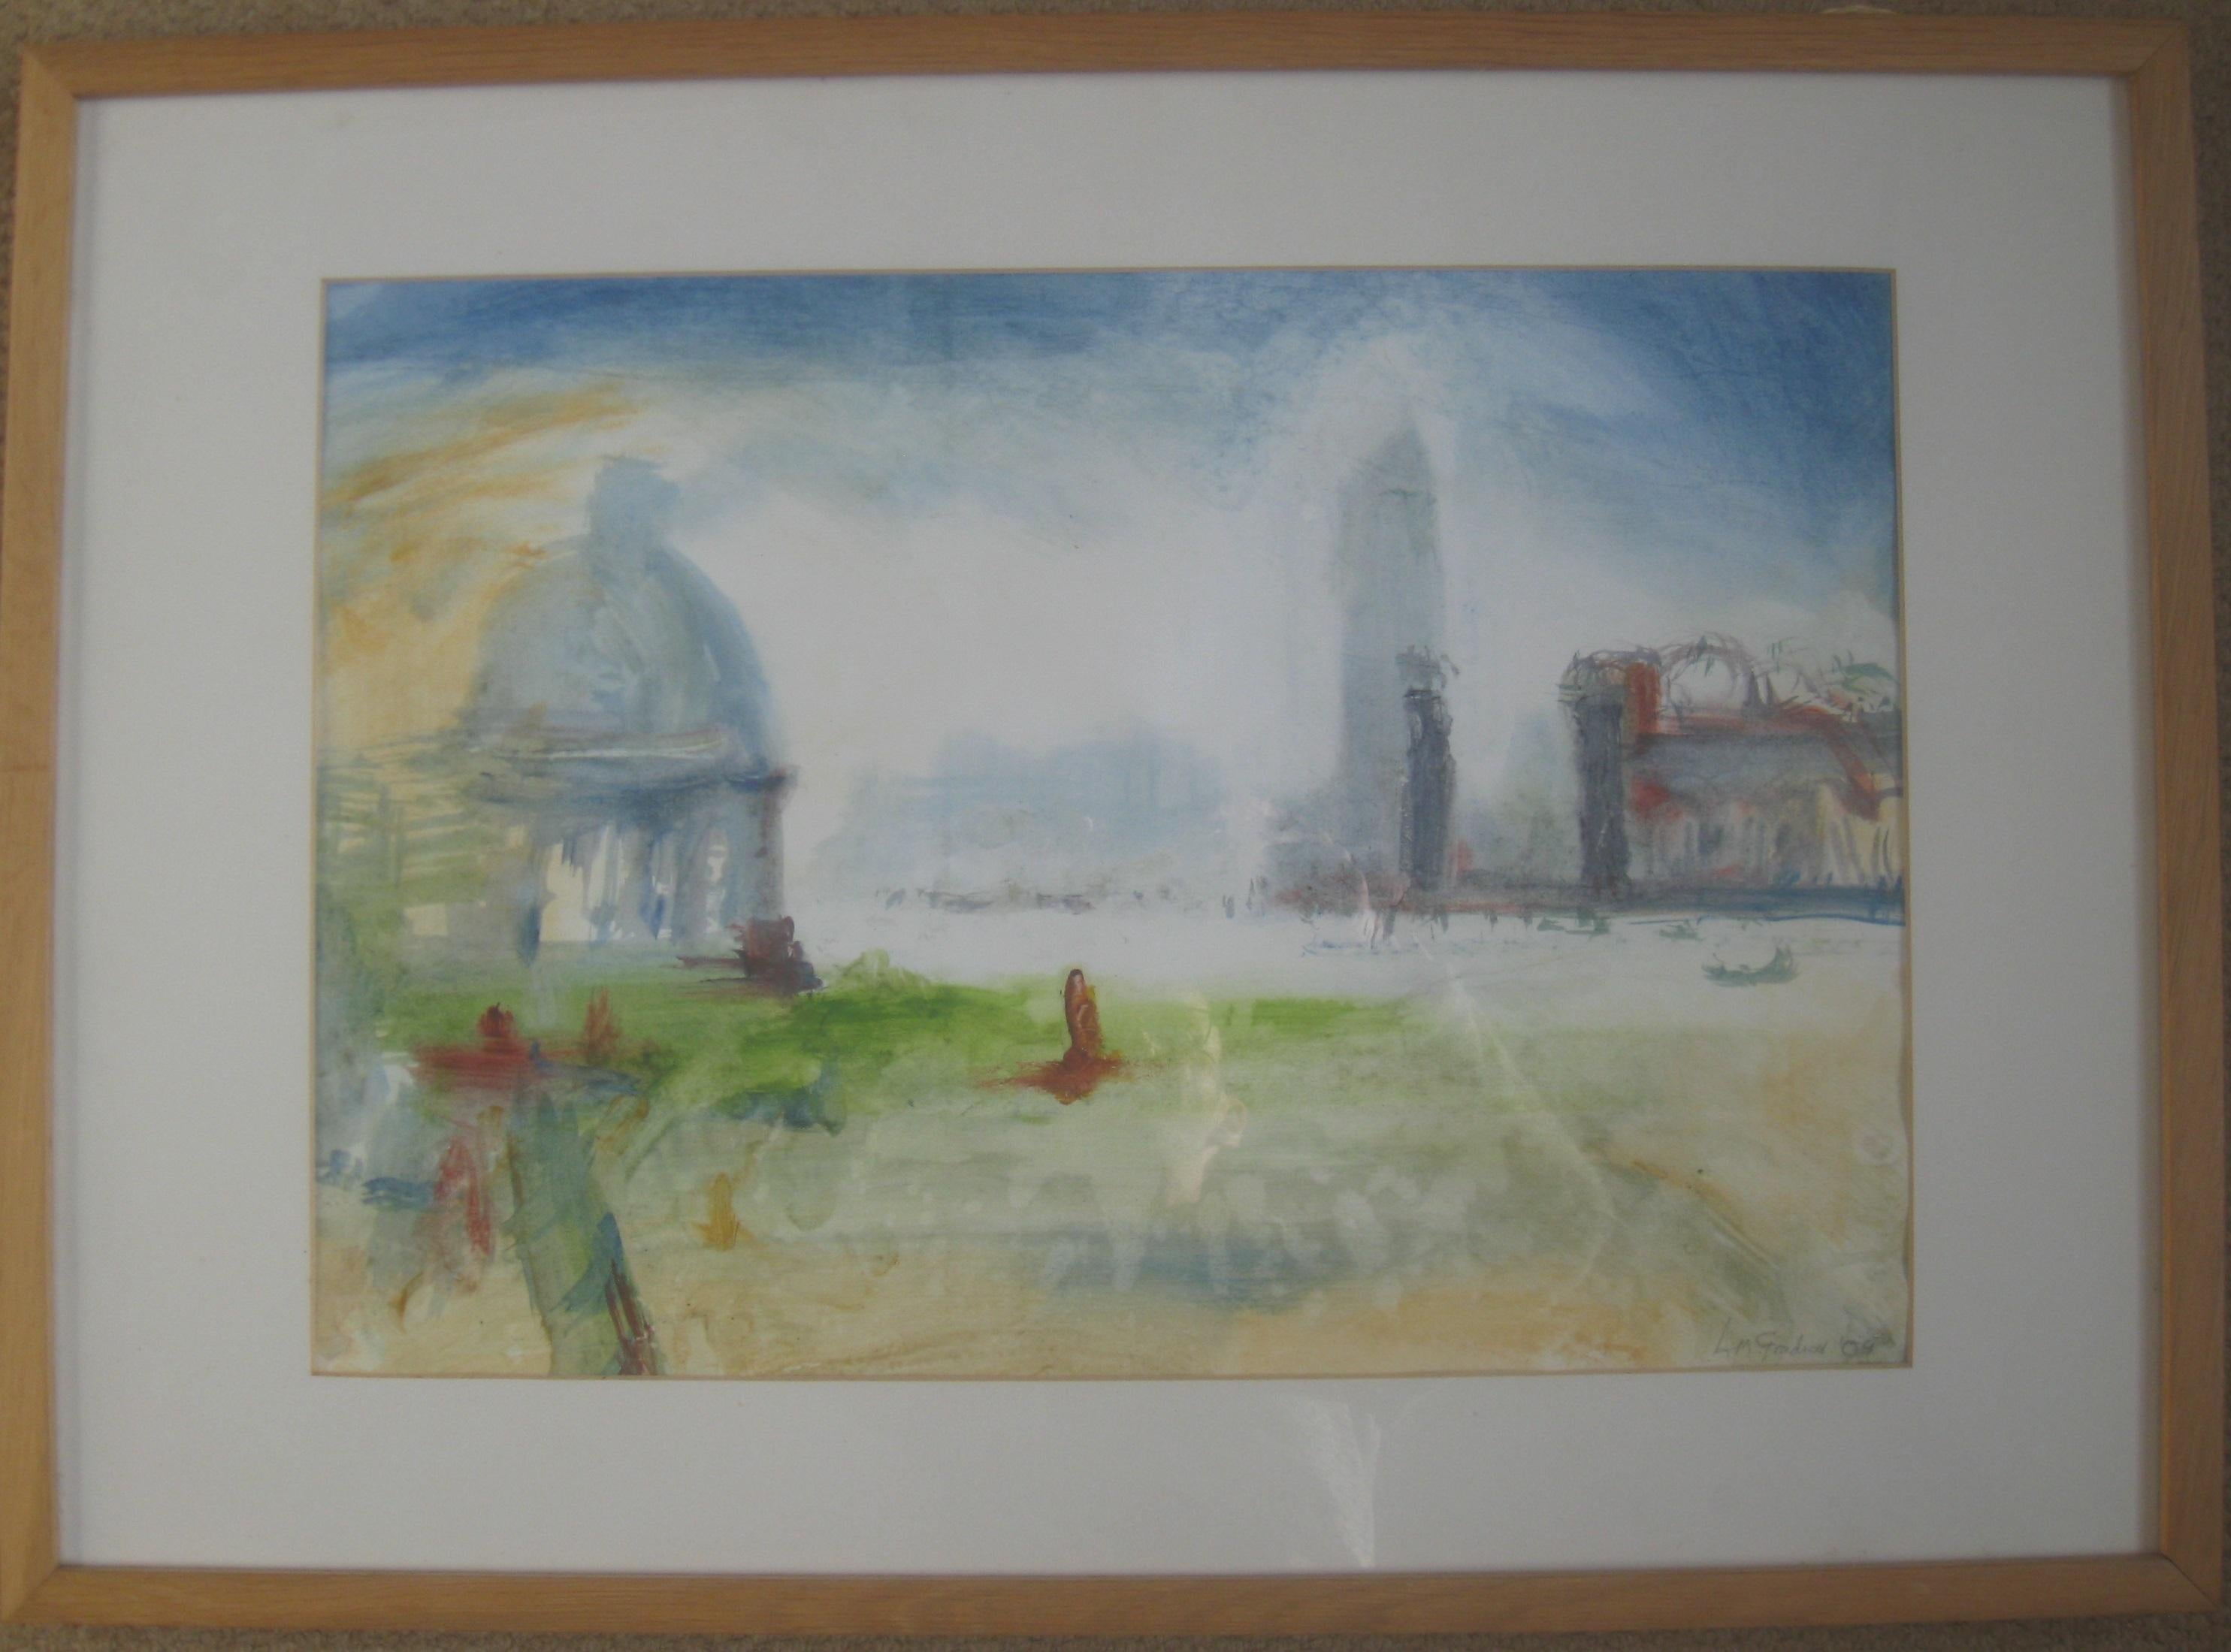 Andy Gradwell Landscape Painting - 'Venice, Lagoon in morning Haze', mixed media on paper. Circa 2007.